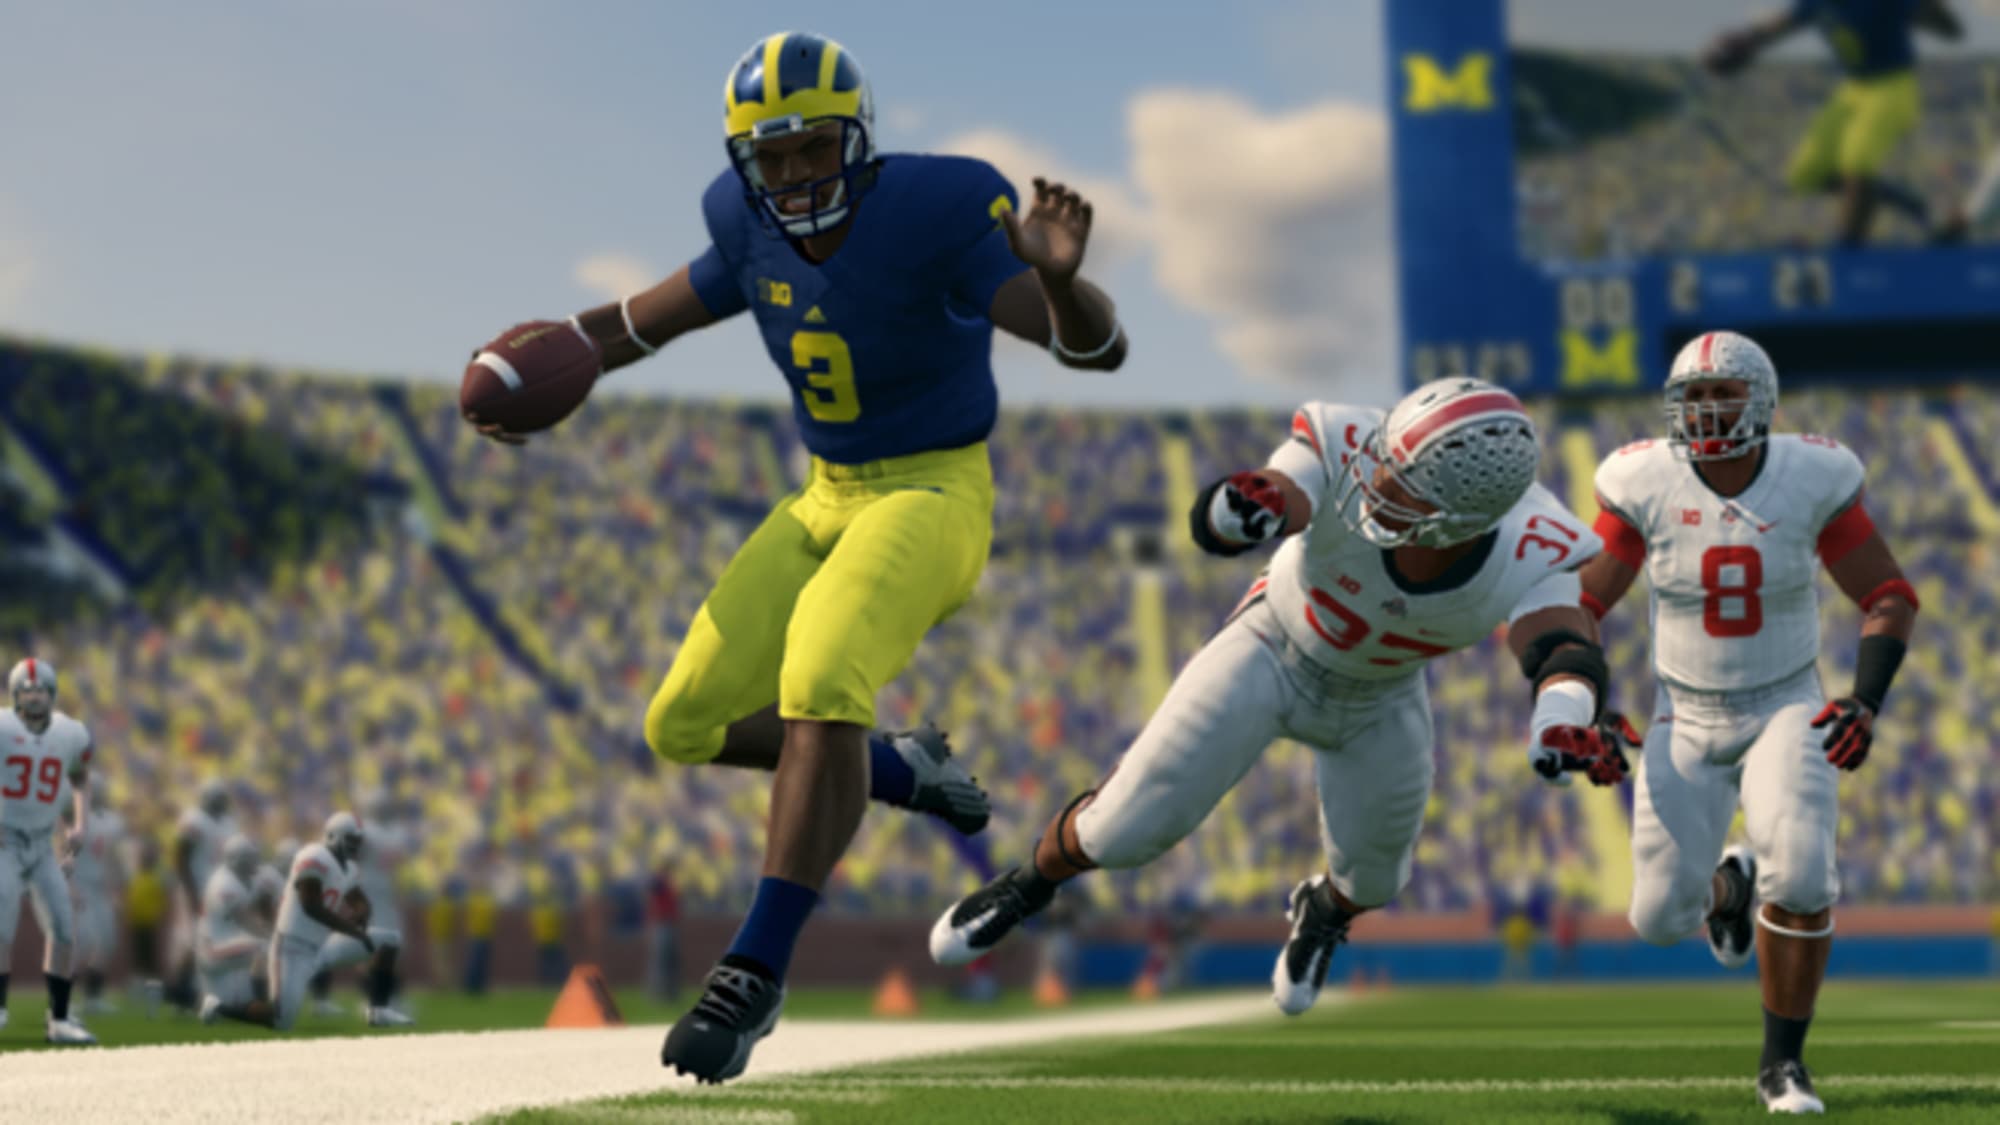 No NCAA Football game until at least 2021 or later, if ever